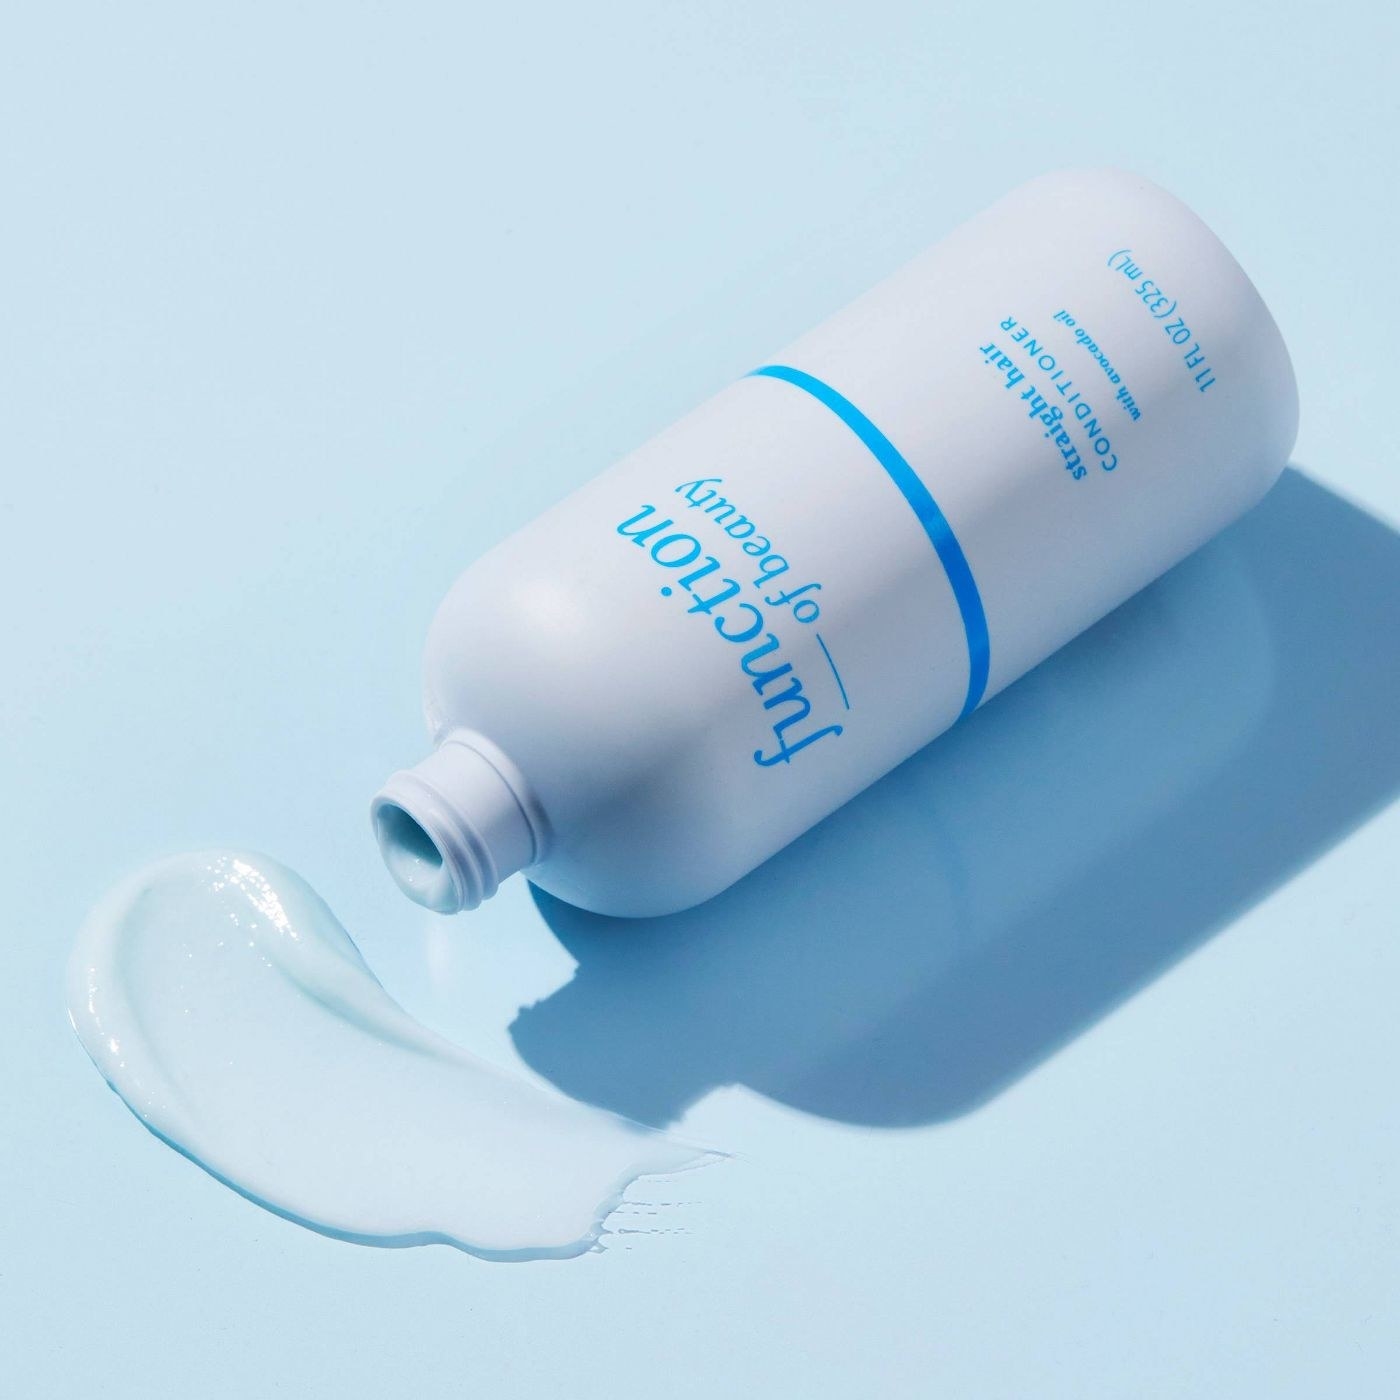 A blue bottle of hair conditioner on a blue backdrop with a swatch